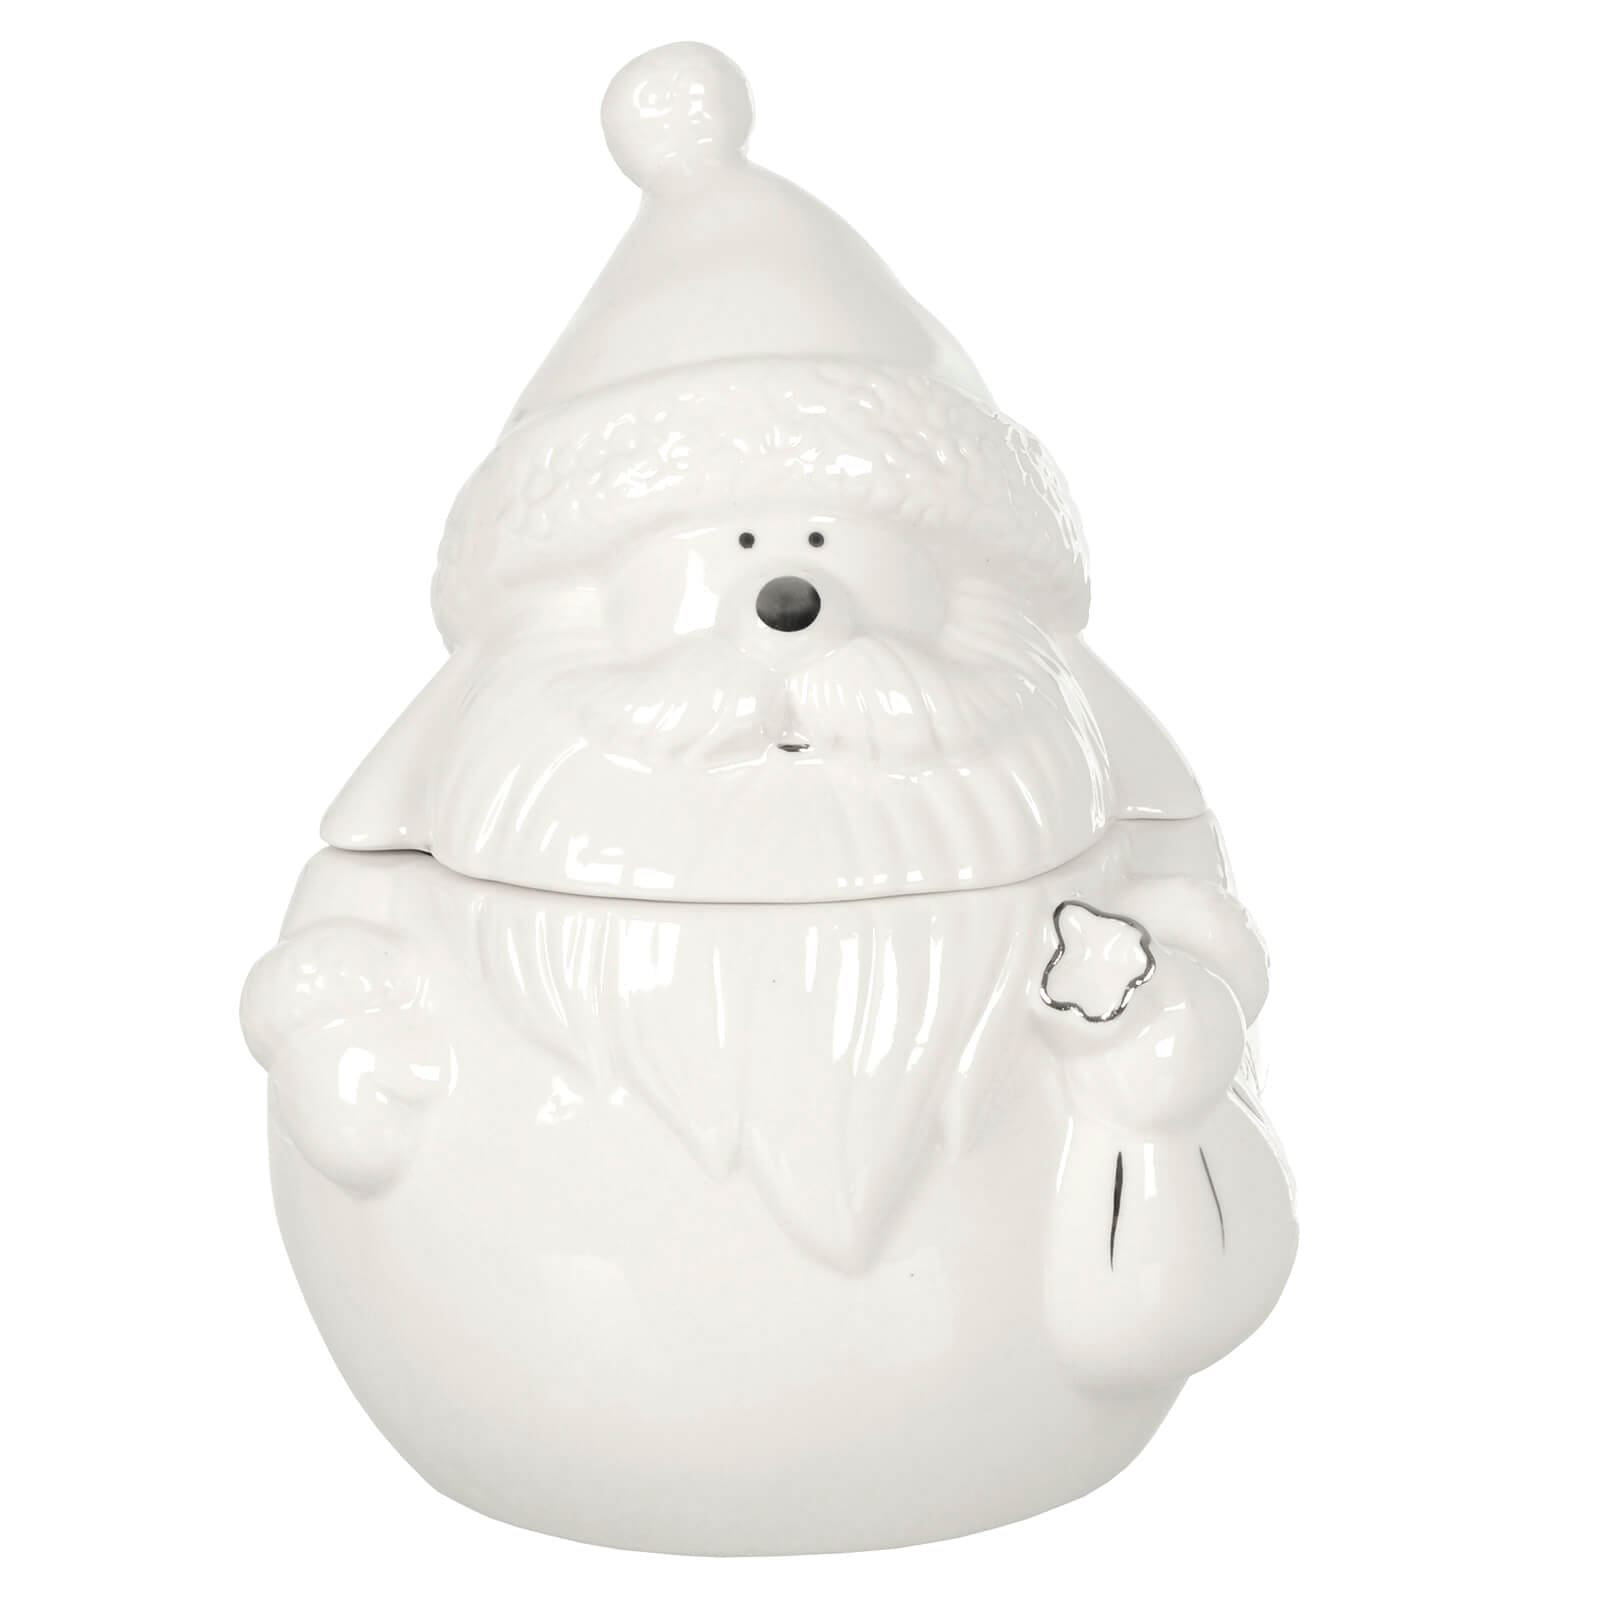 White ceramic Santa Christmas storage jar with silver detail on gift sack and face details